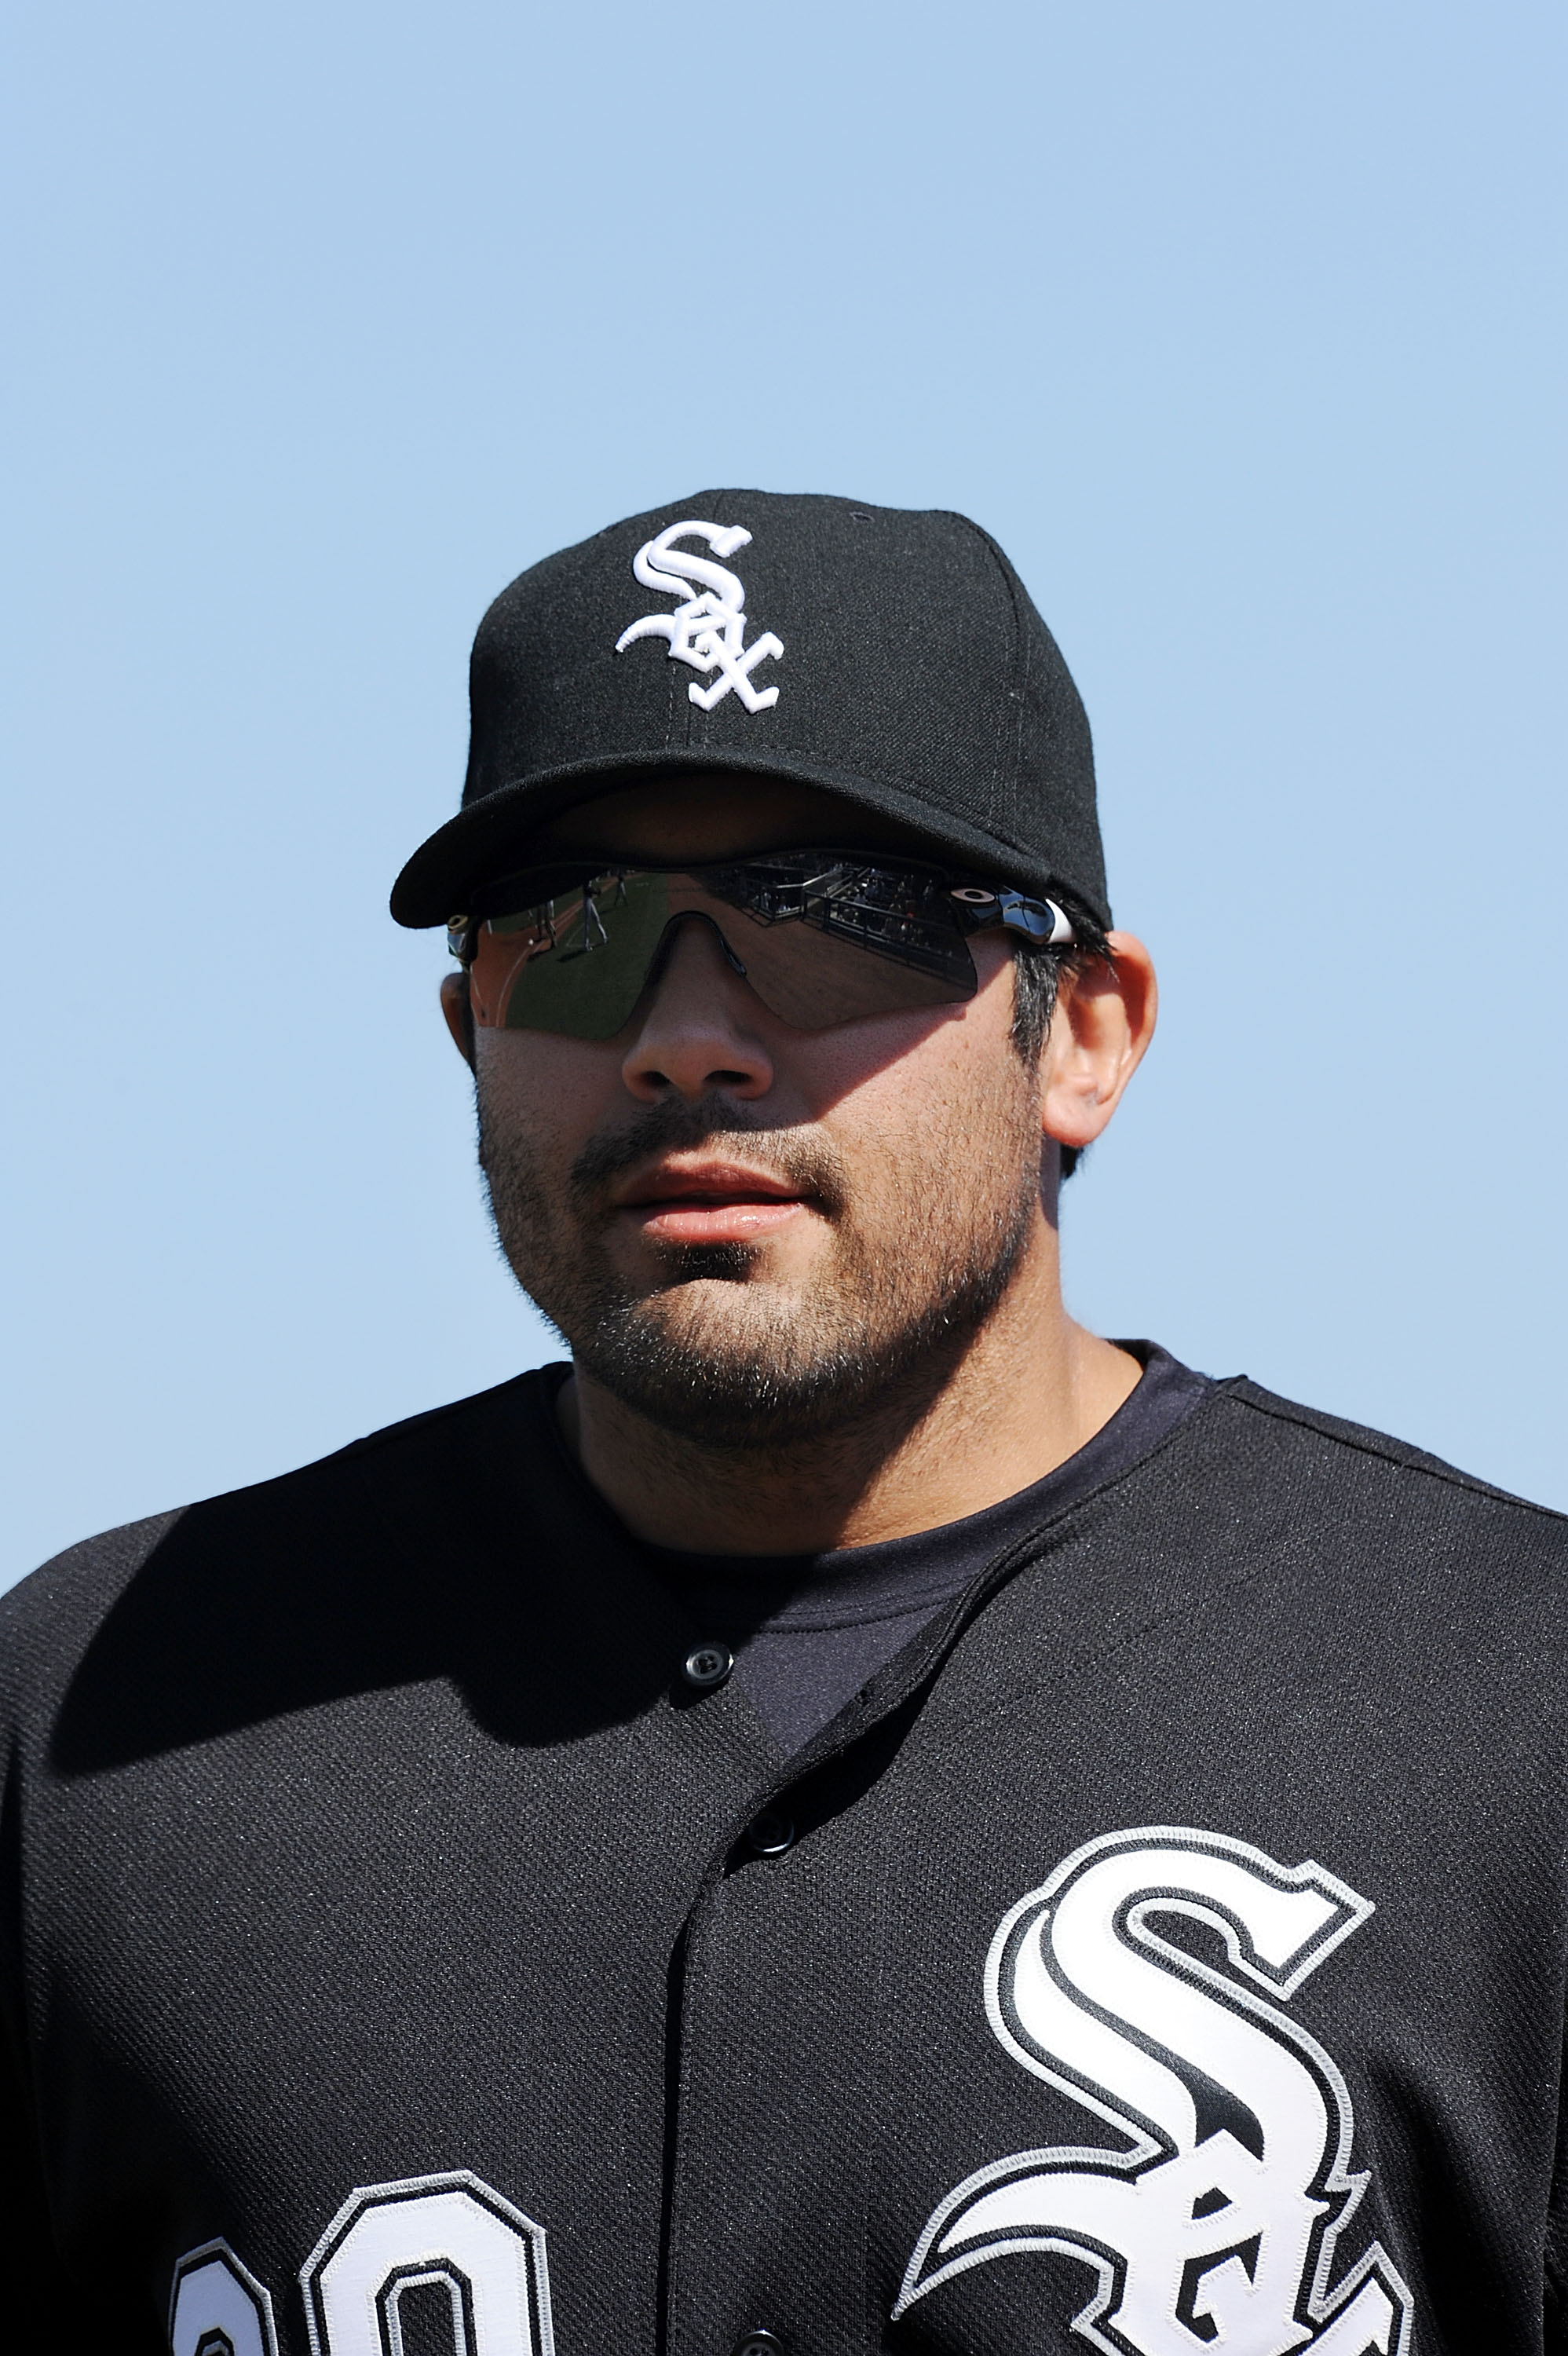 5 popular moves the Chicago White Sox should make in the offseason